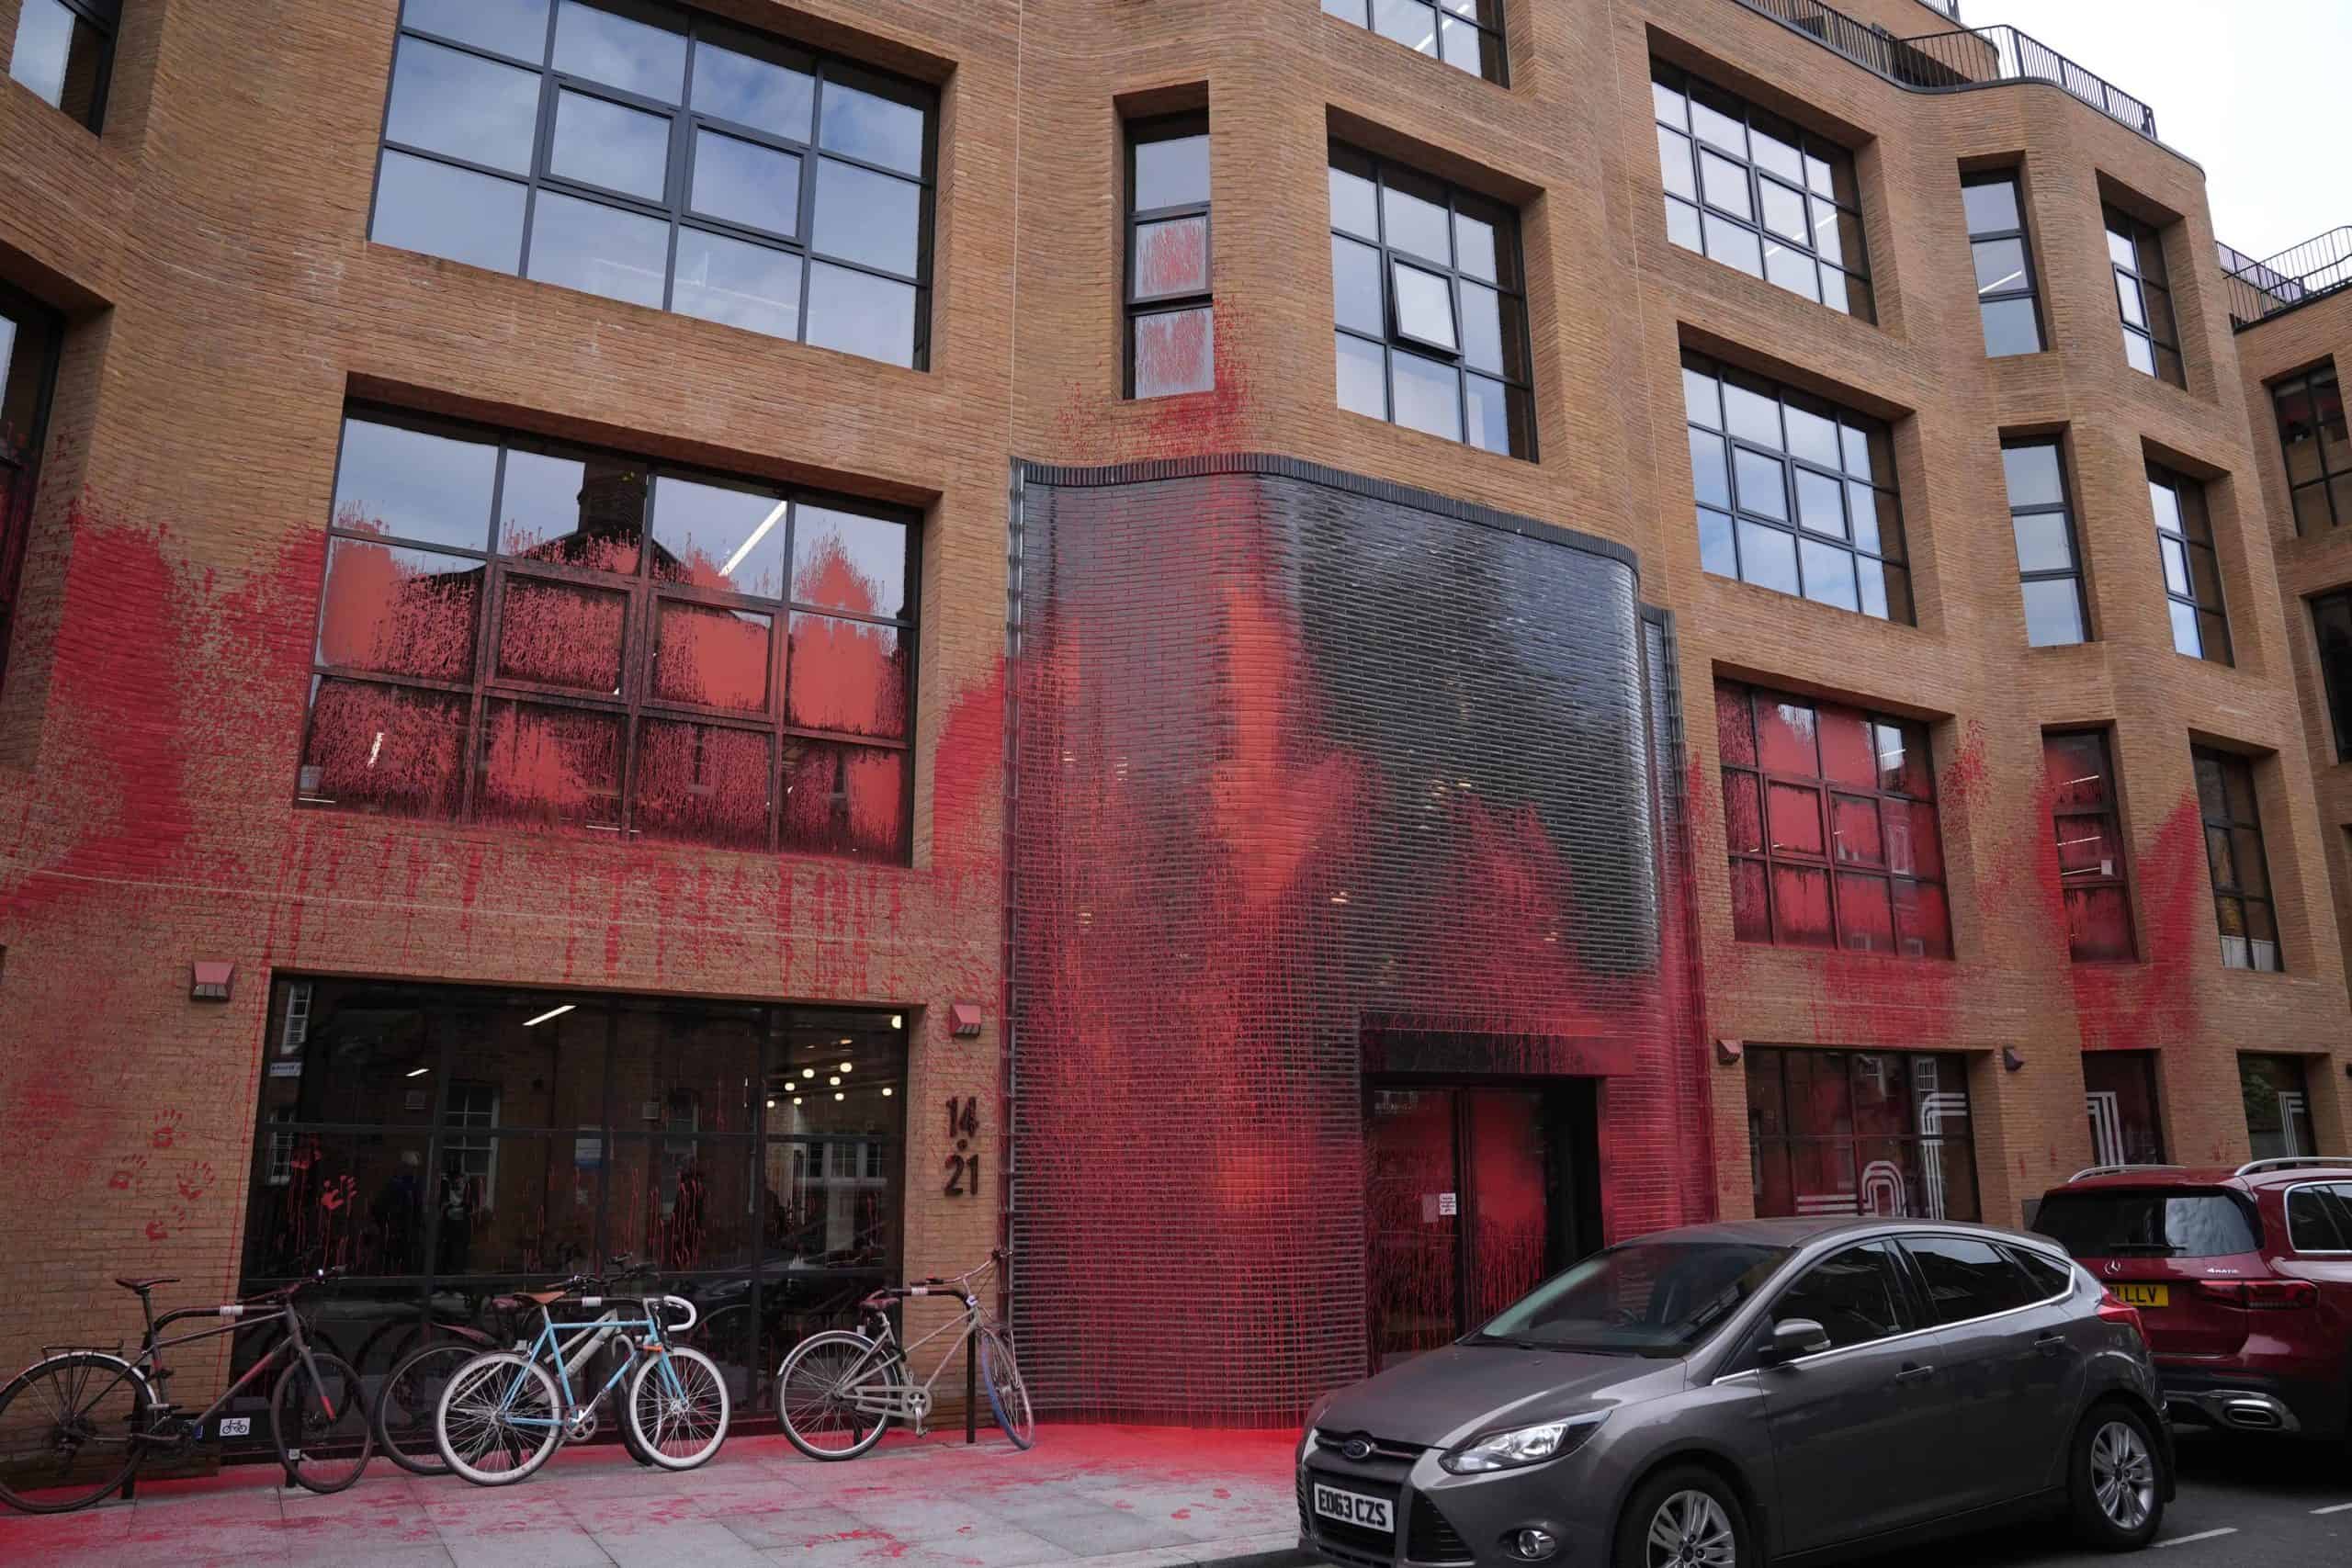 Activists demanding arms embargo on Israel spray Labour HQ with red paint